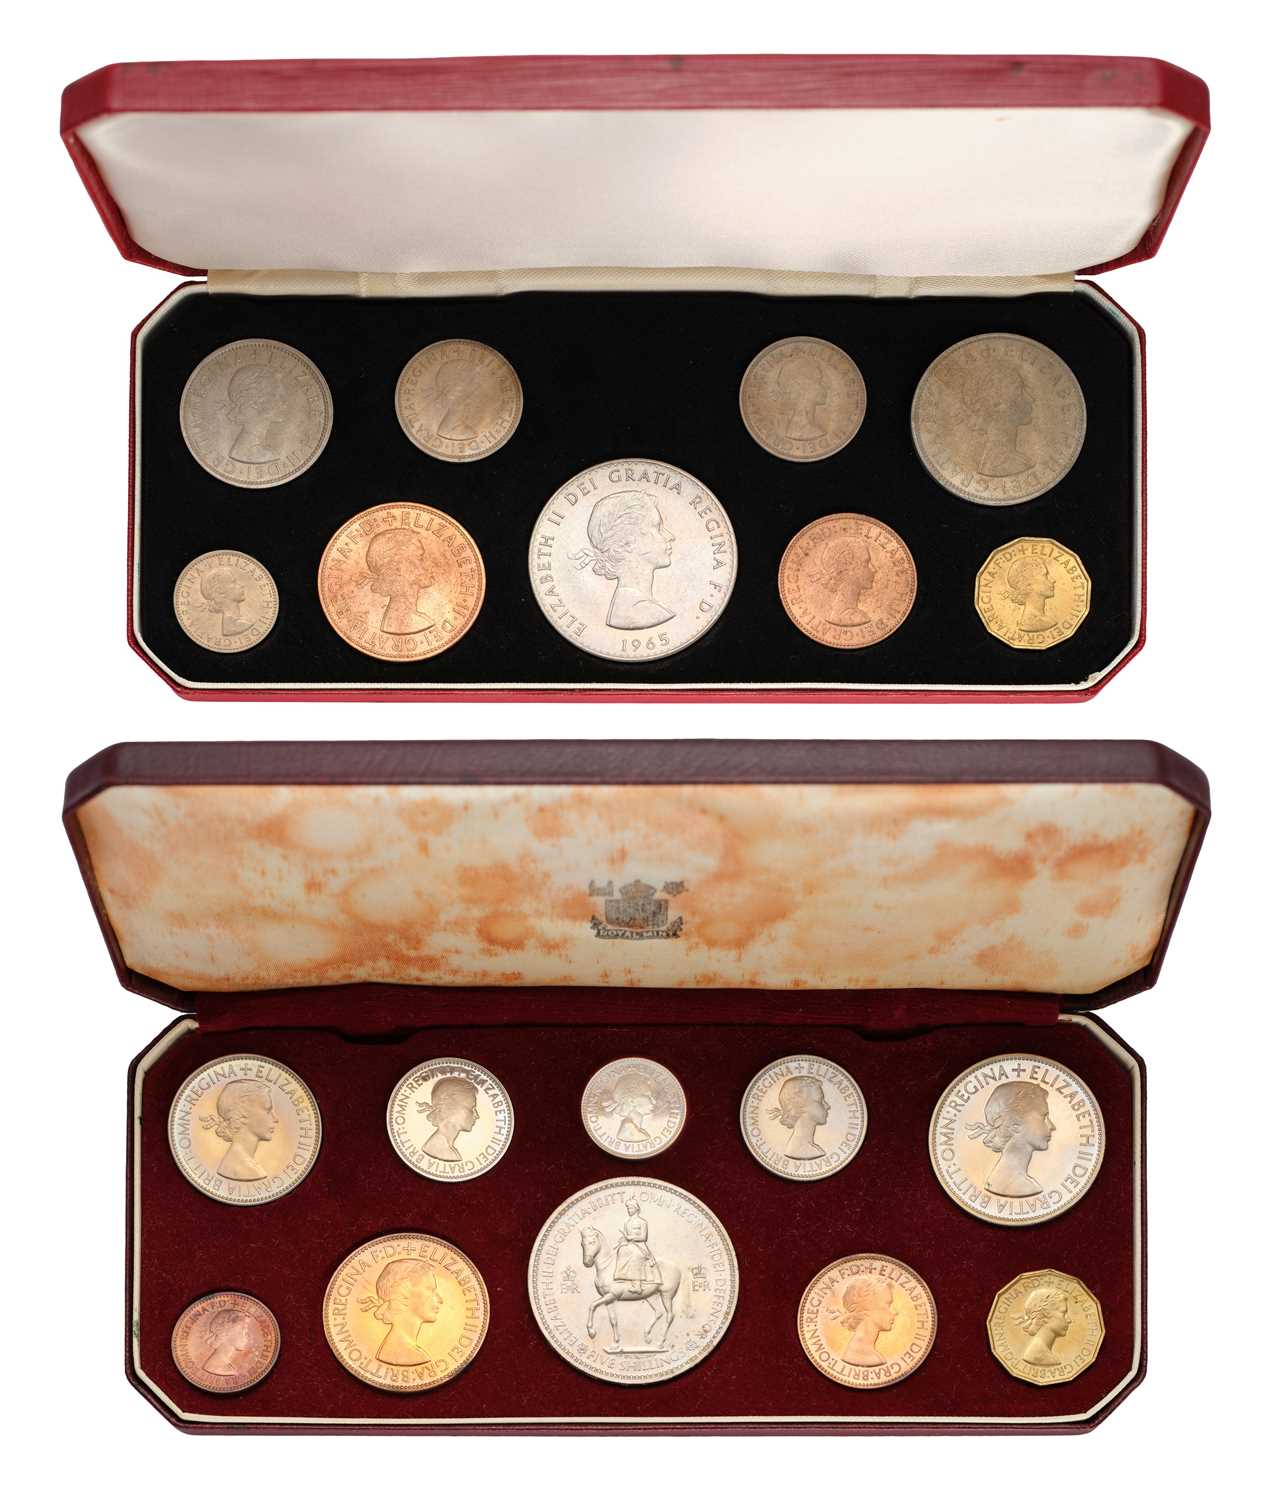 Elizabeth II, 1953 'Coronation' Proof Set; 10 coin set, crown to farthing with both English and